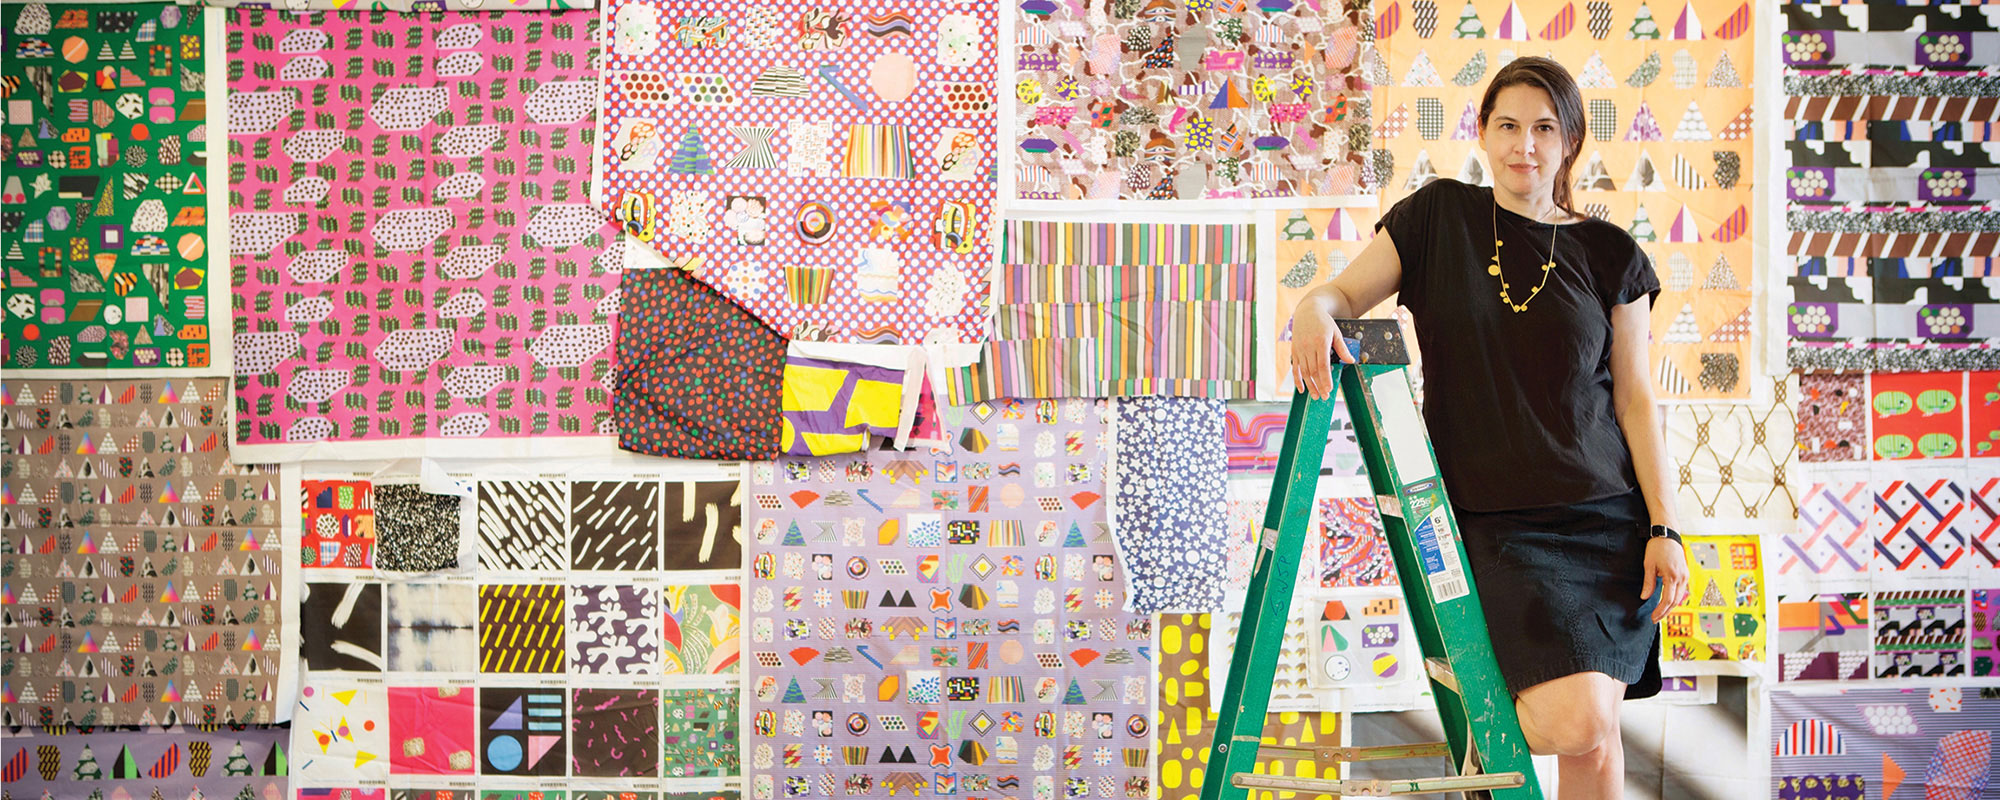 ARtist Ruth Root standing on a ladder in front of digitally printed fabric swatches.